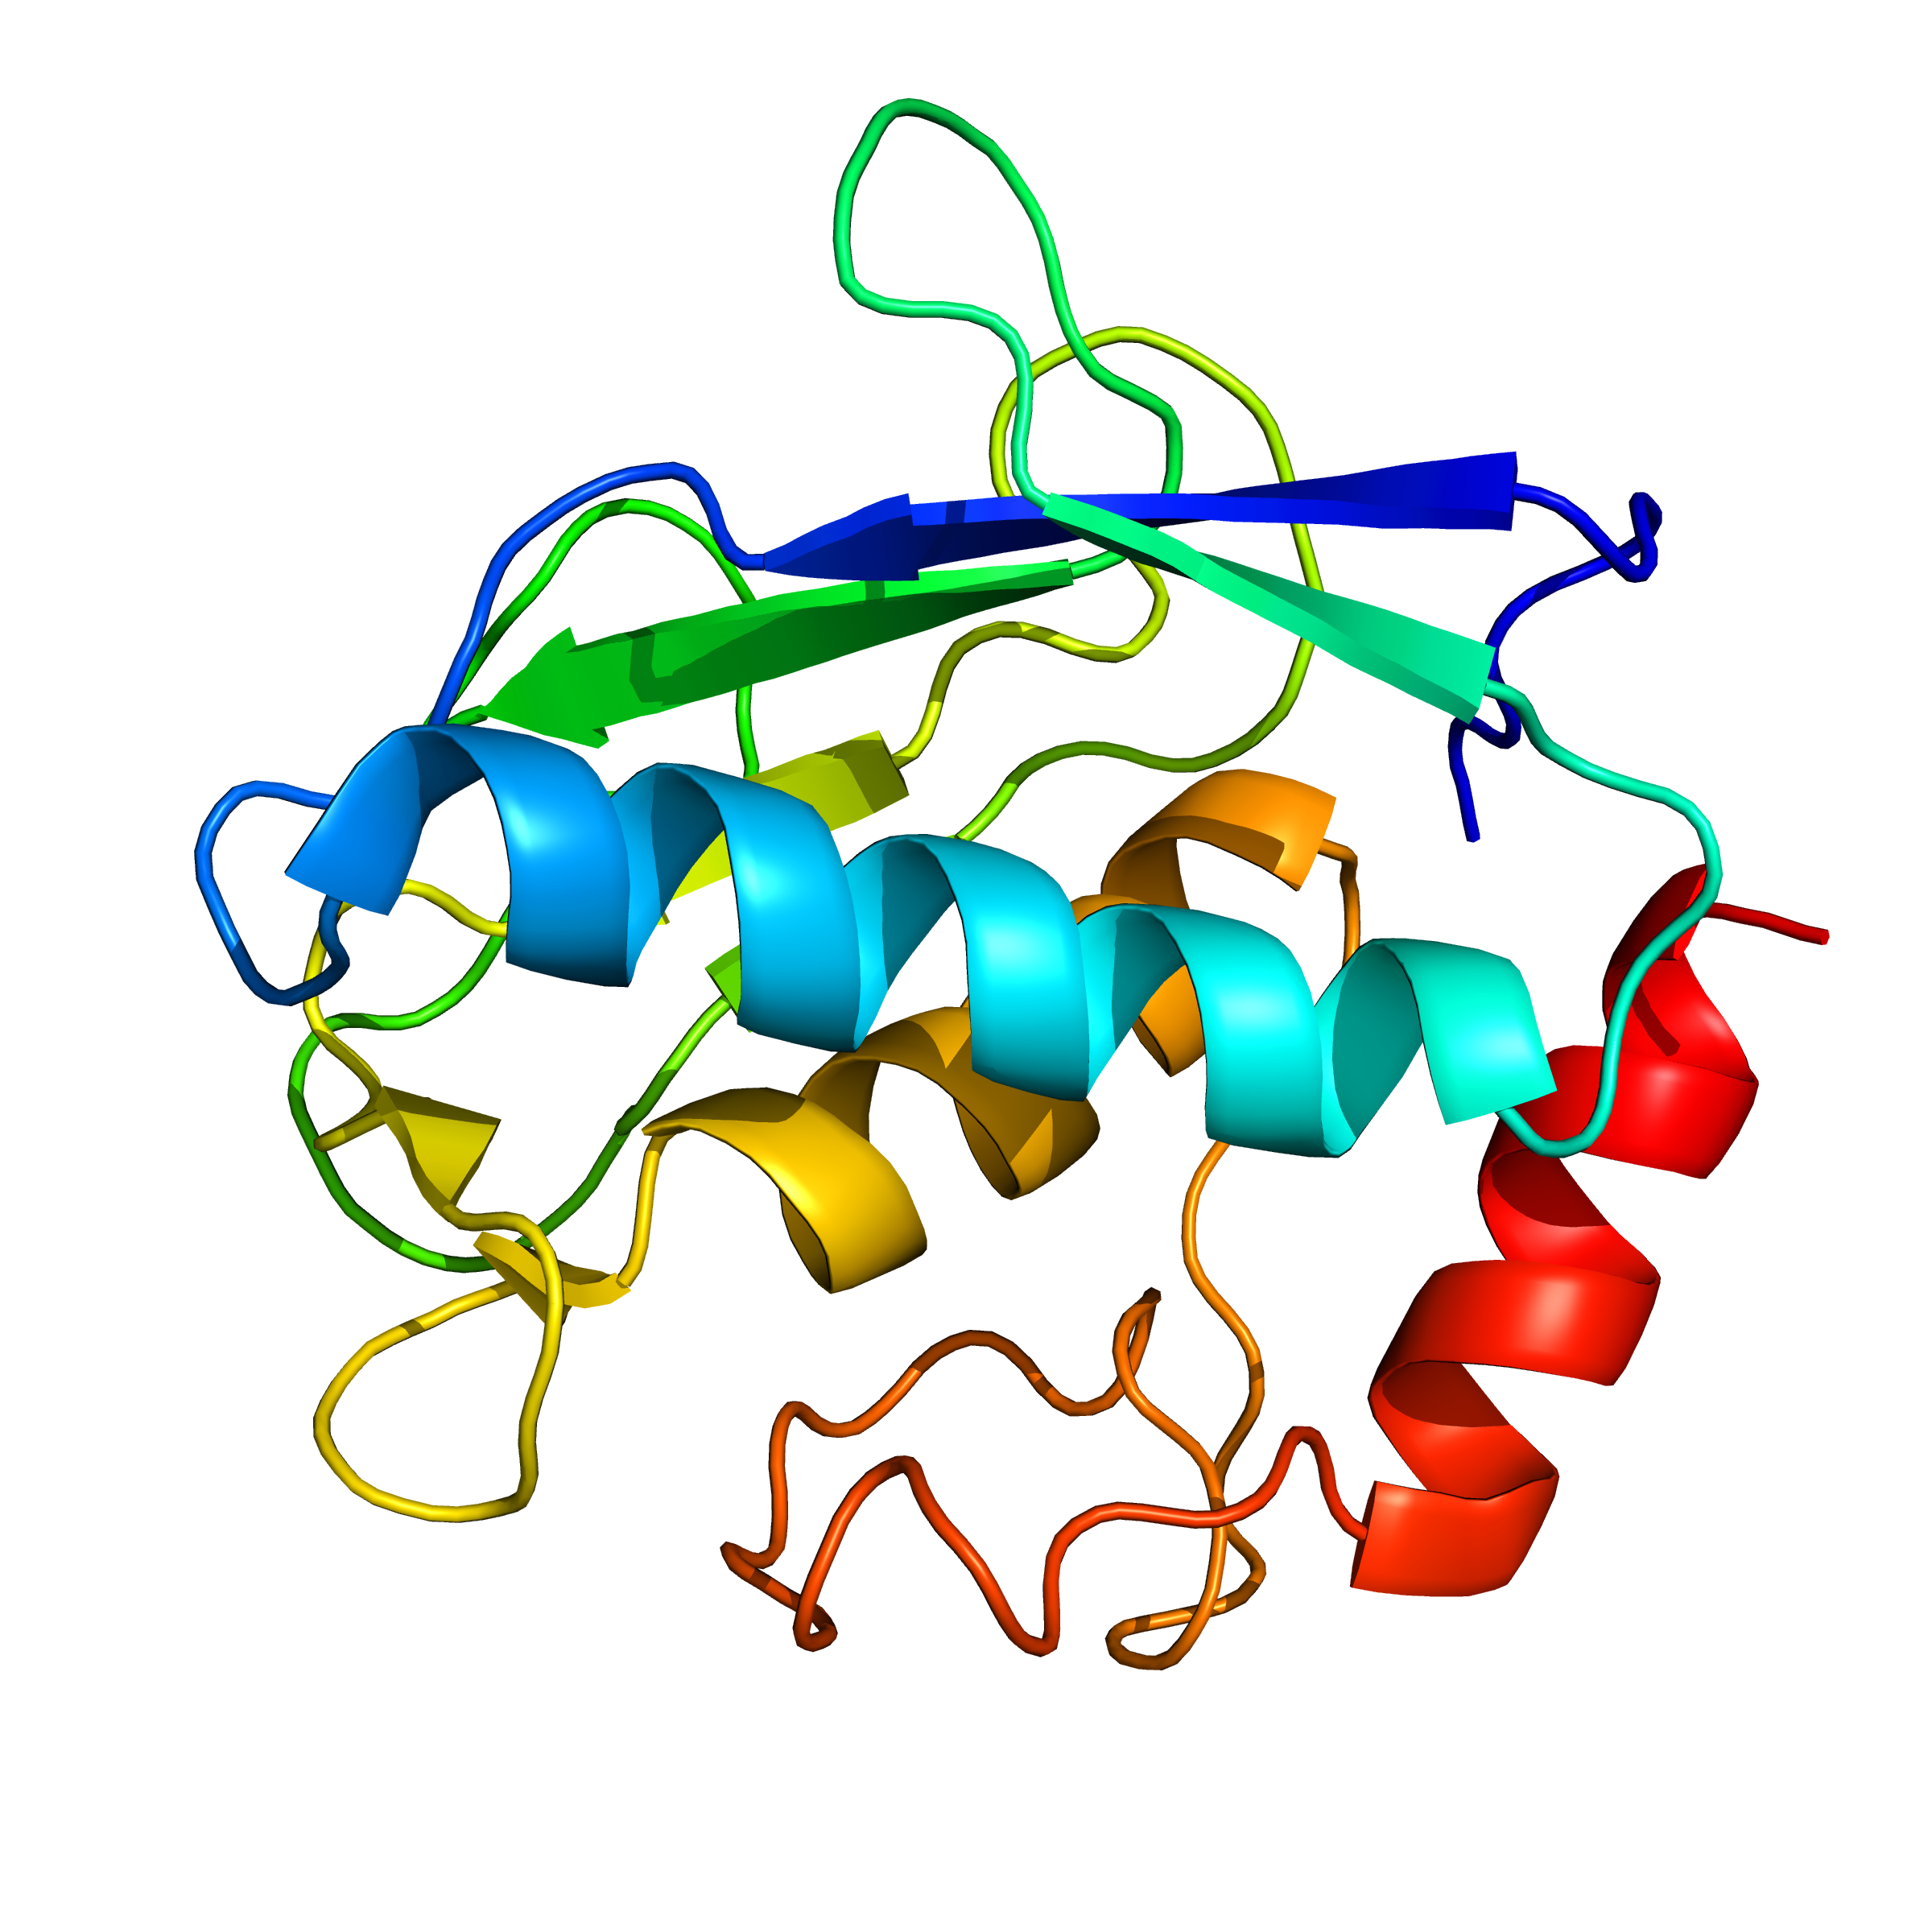 mmp12_cat | recombinant proteins offer